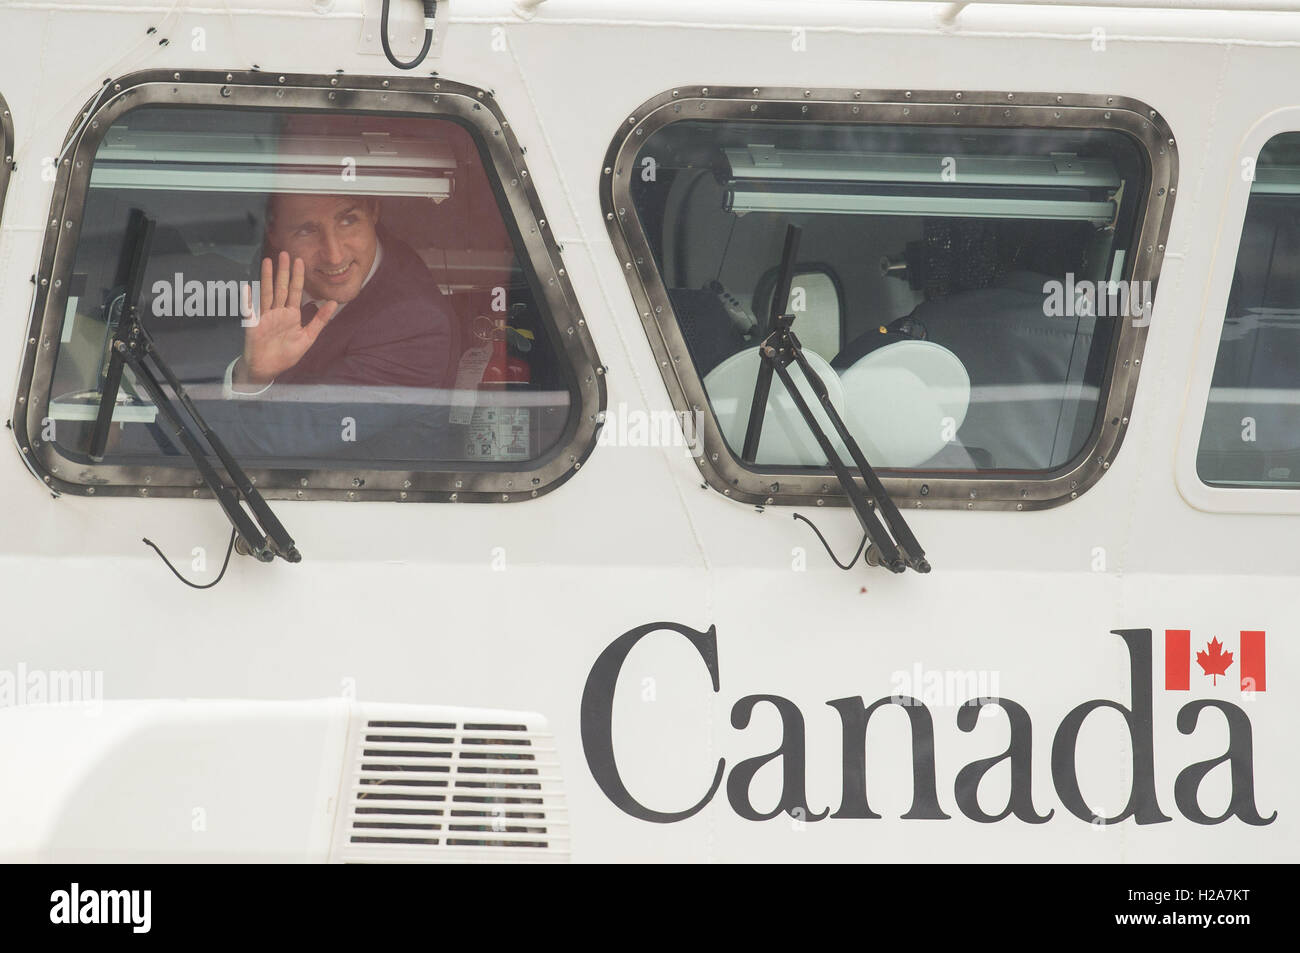 Prime Minister of Canada Justin Trudeau waves from the window of a hovercraft during a visit to the Kitsilano Coast Guard Station, in Vancouver, Canada, during the second day of the Royal Tour to Canada. Stock Photo